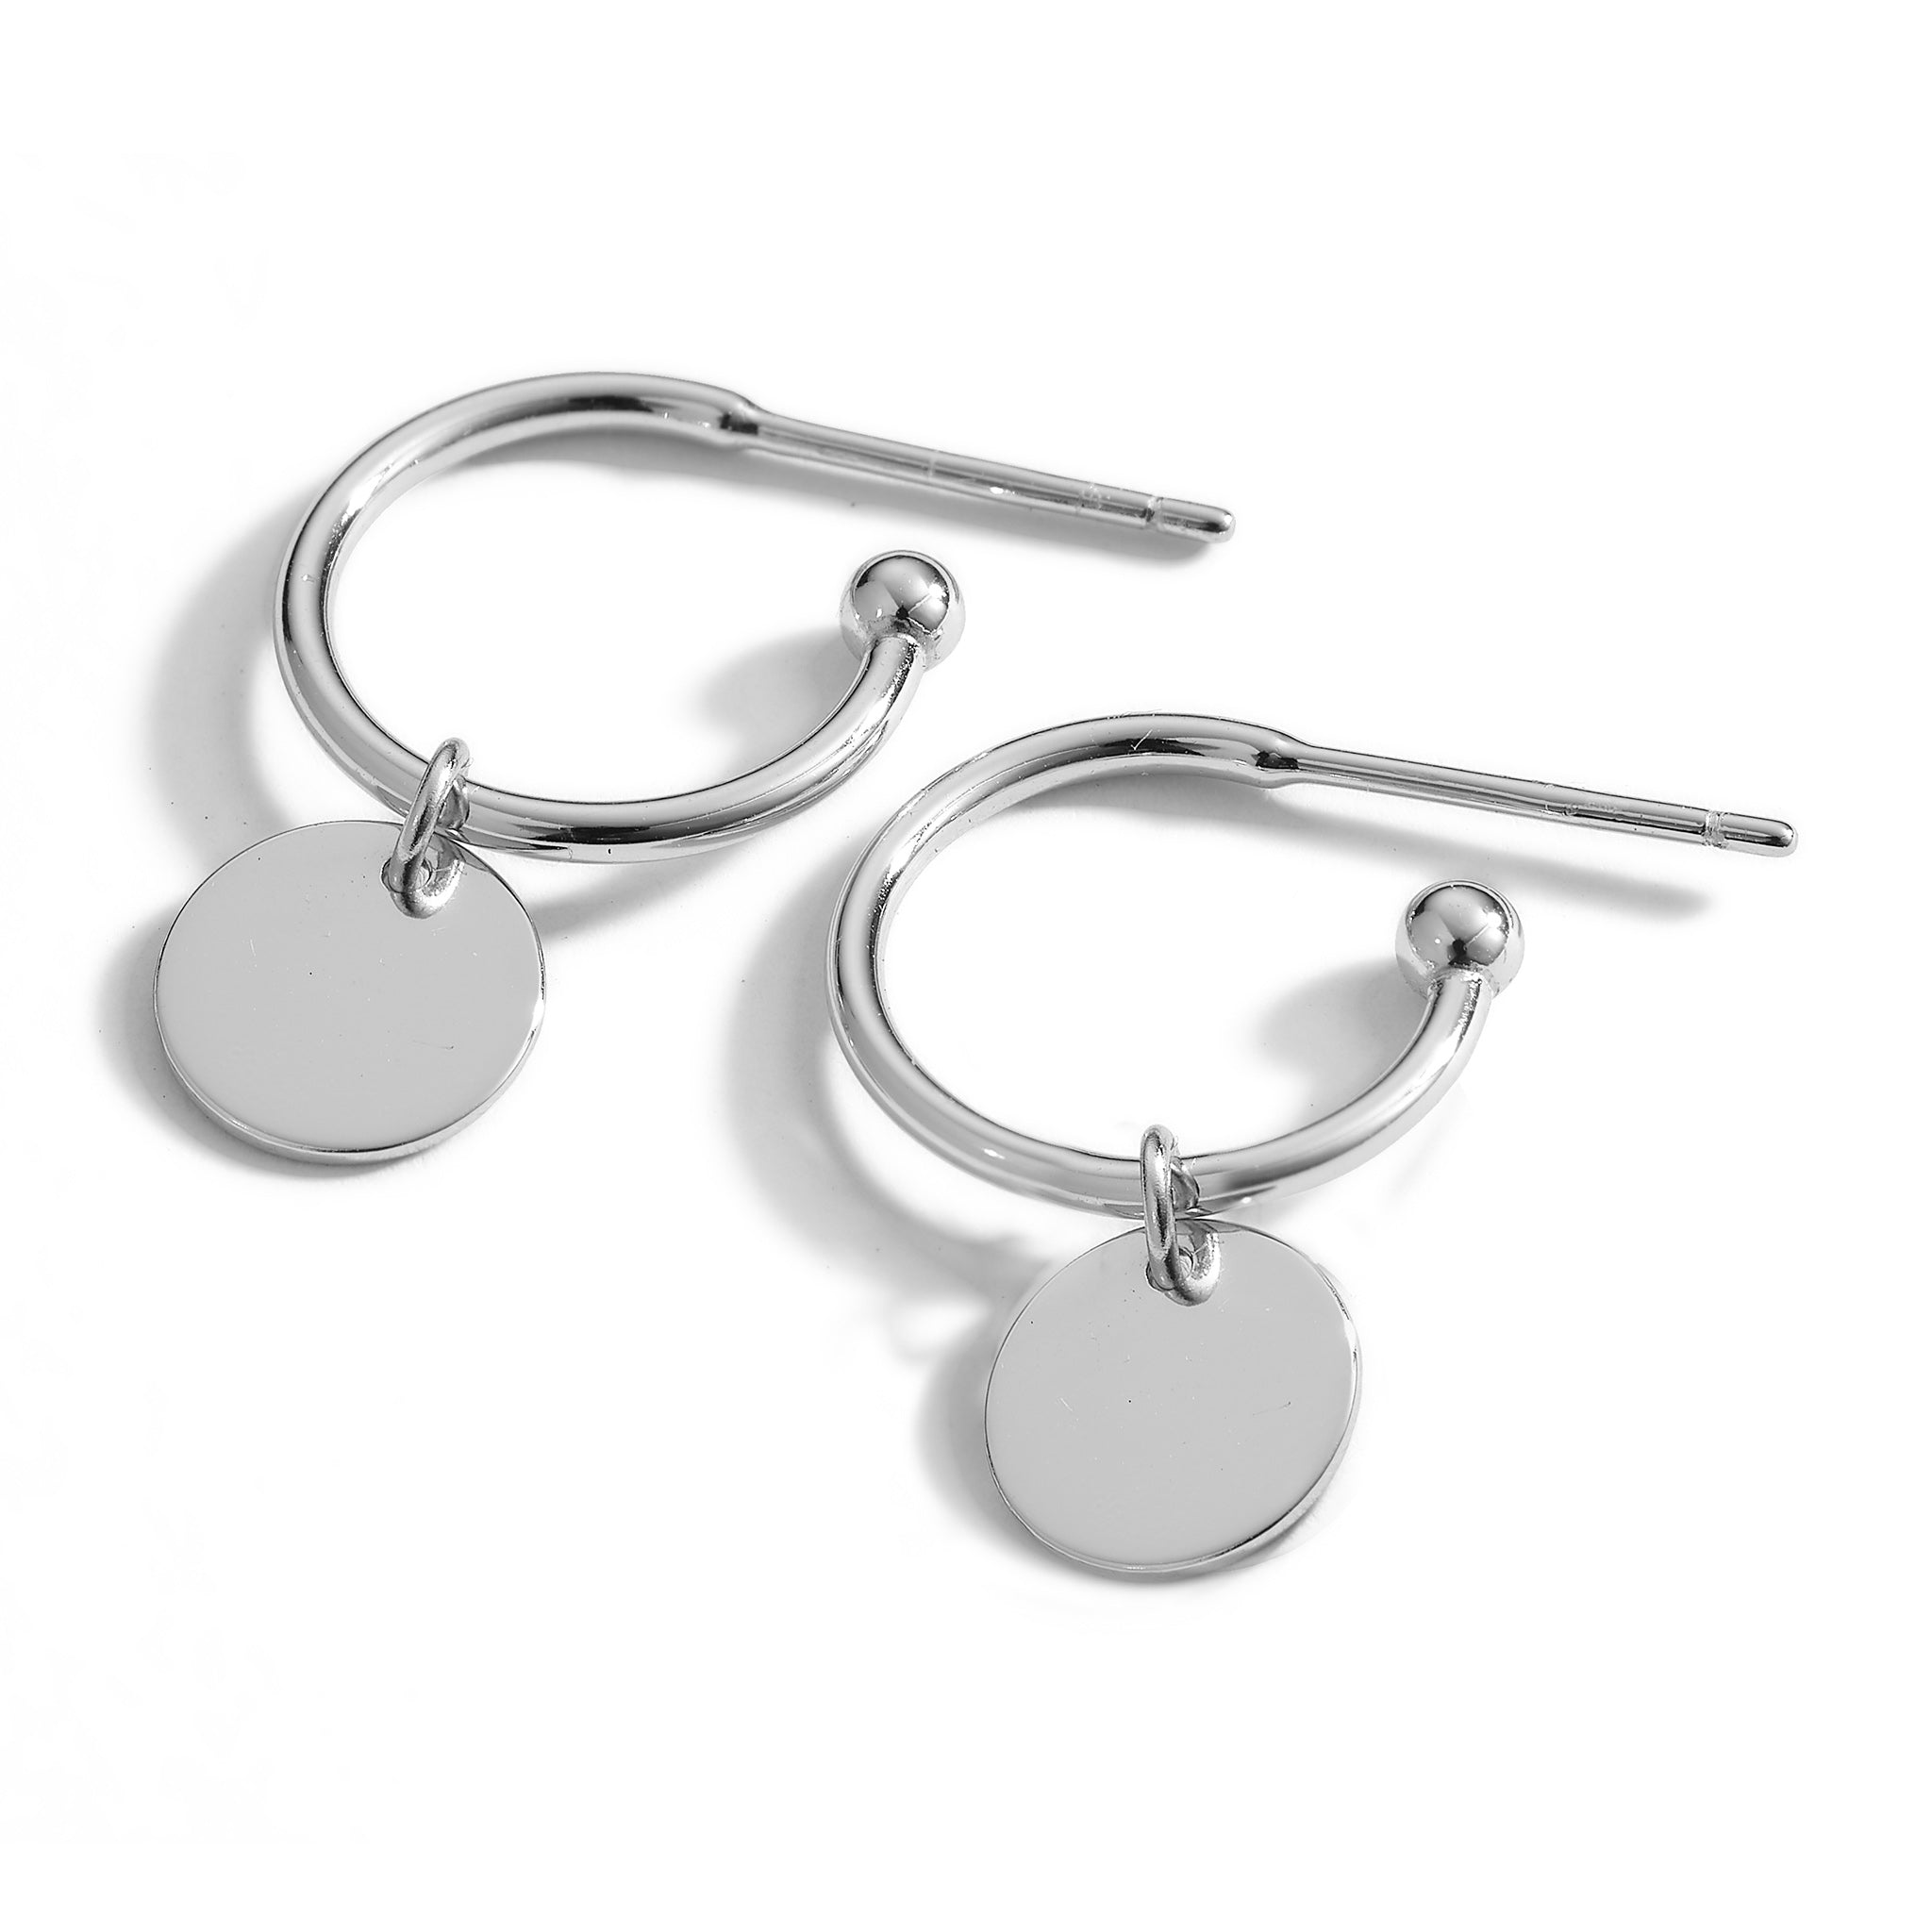 THE MAKERY STERLING SILVER LOOP EARRING WITH HANGING DISK